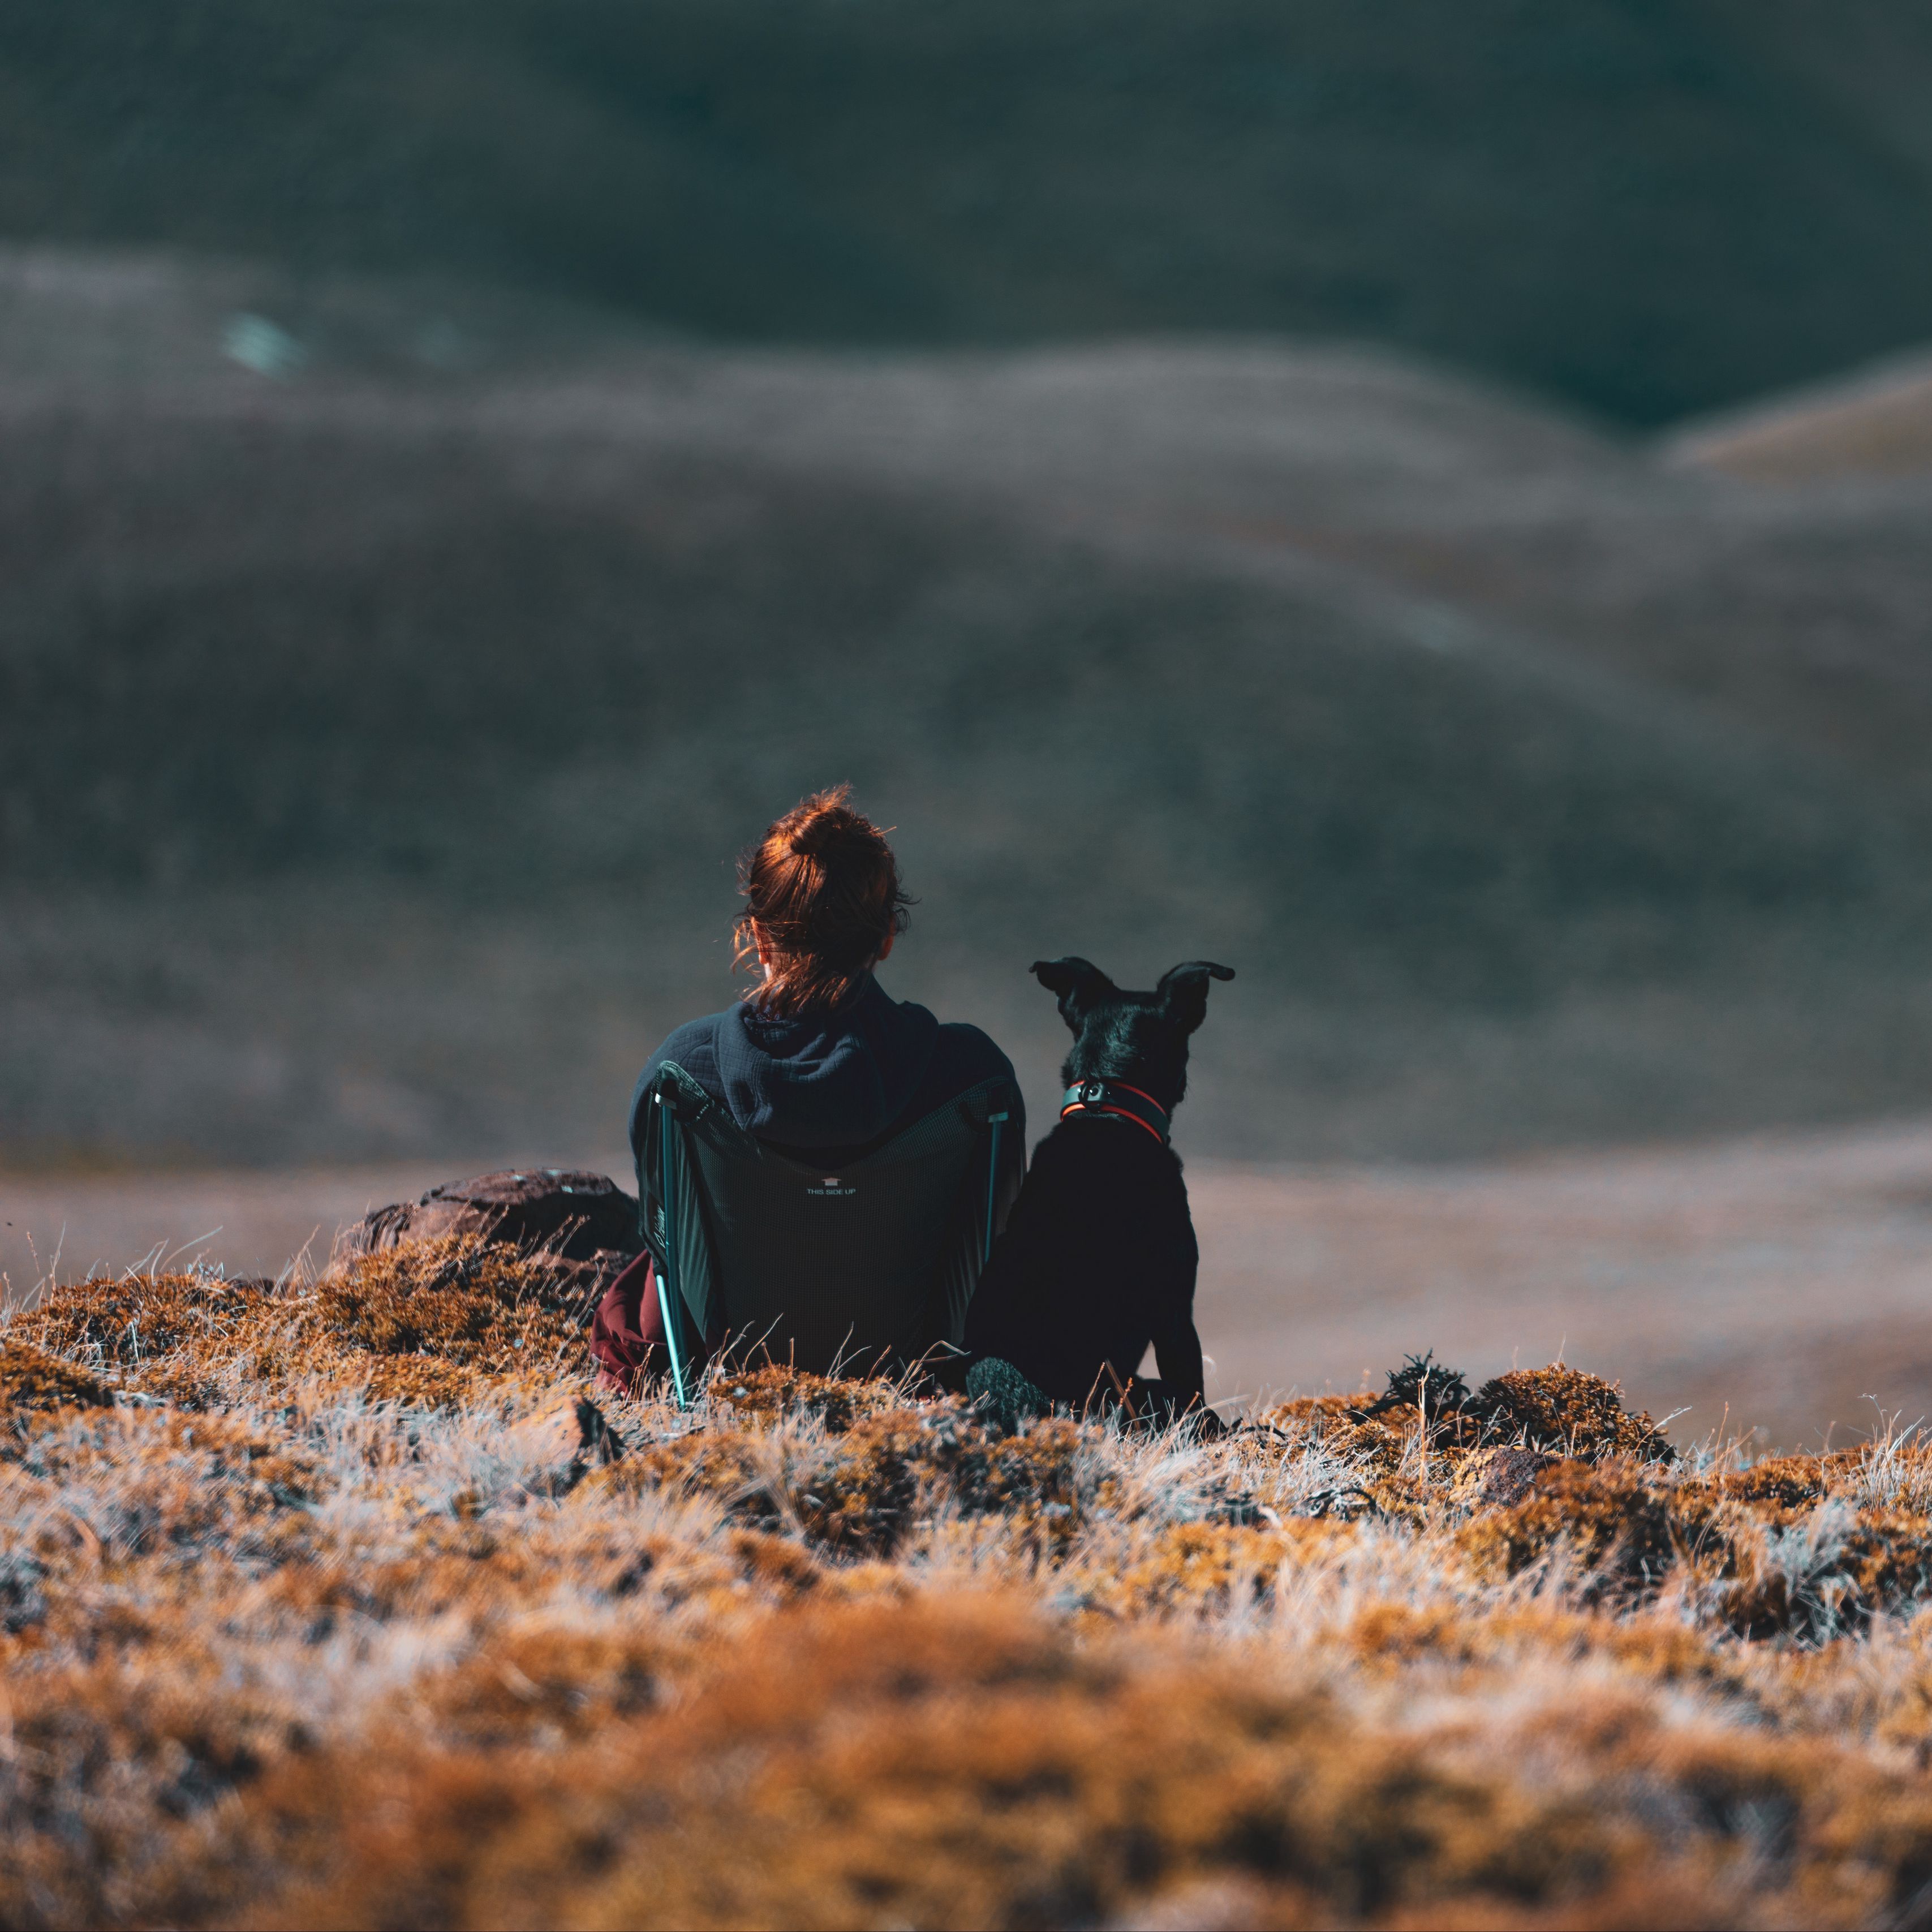 Download wallpaper 3415x3415 girl, dog, friends, mountains, trip ipad pro 12.9 retina for parallax HD background